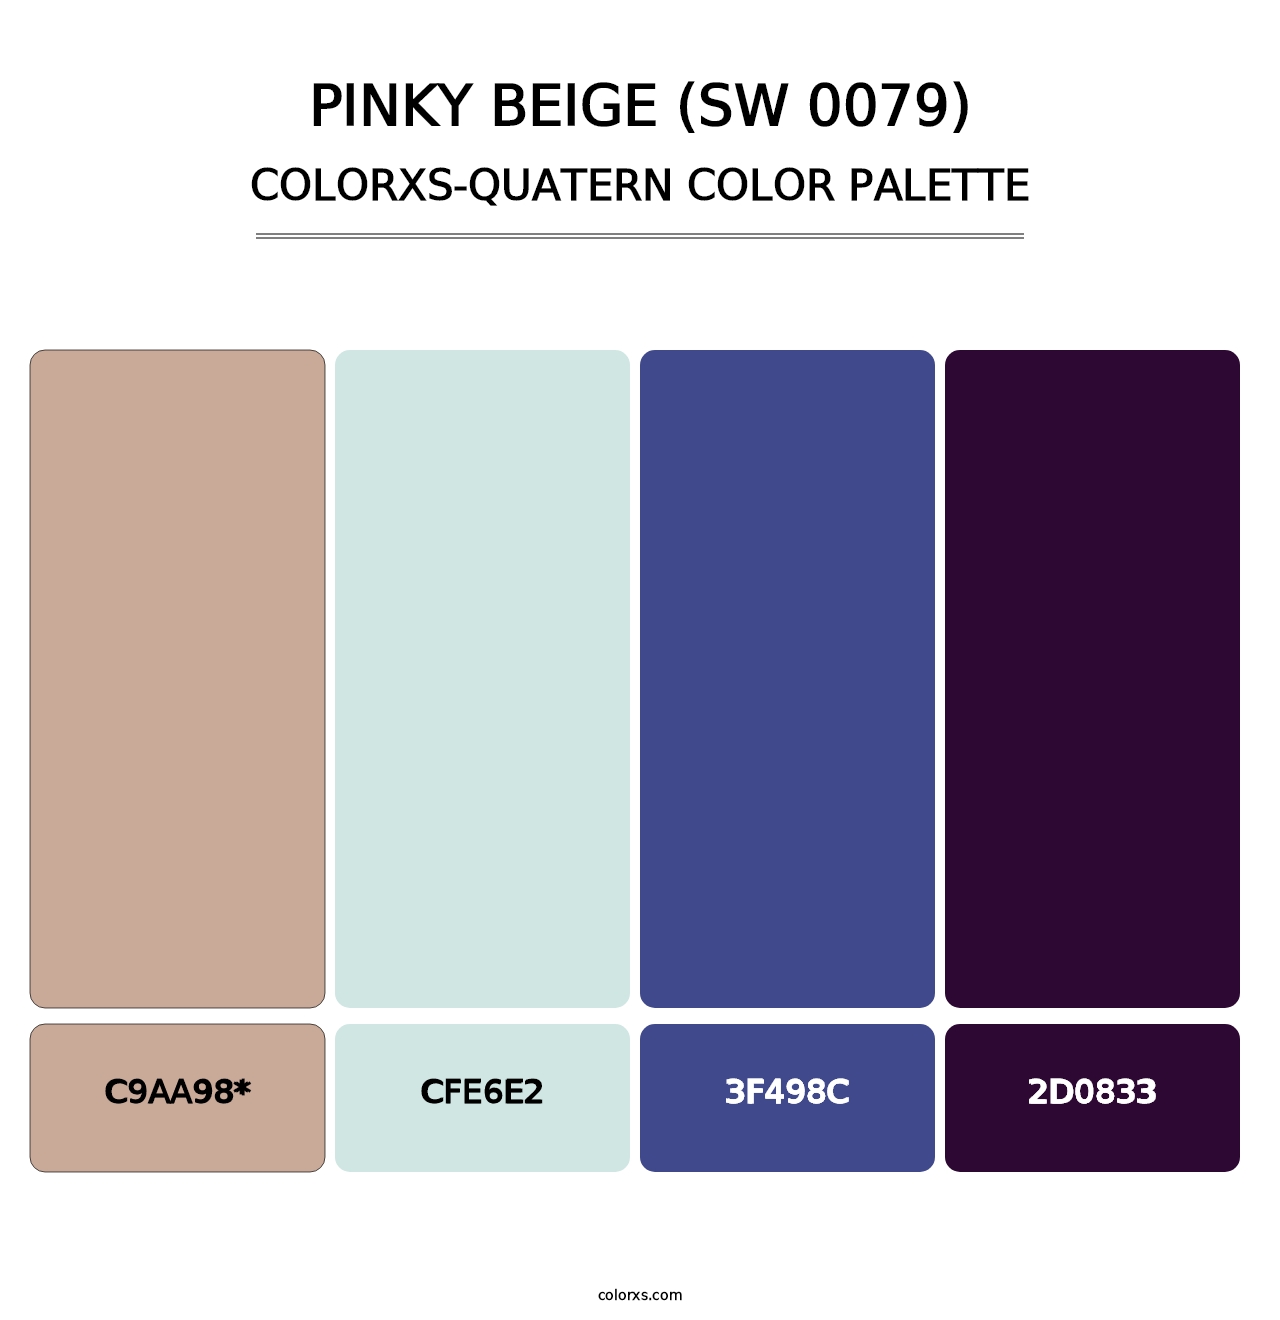 Pinky Beige (SW 0079) - Colorxs Quatern Palette